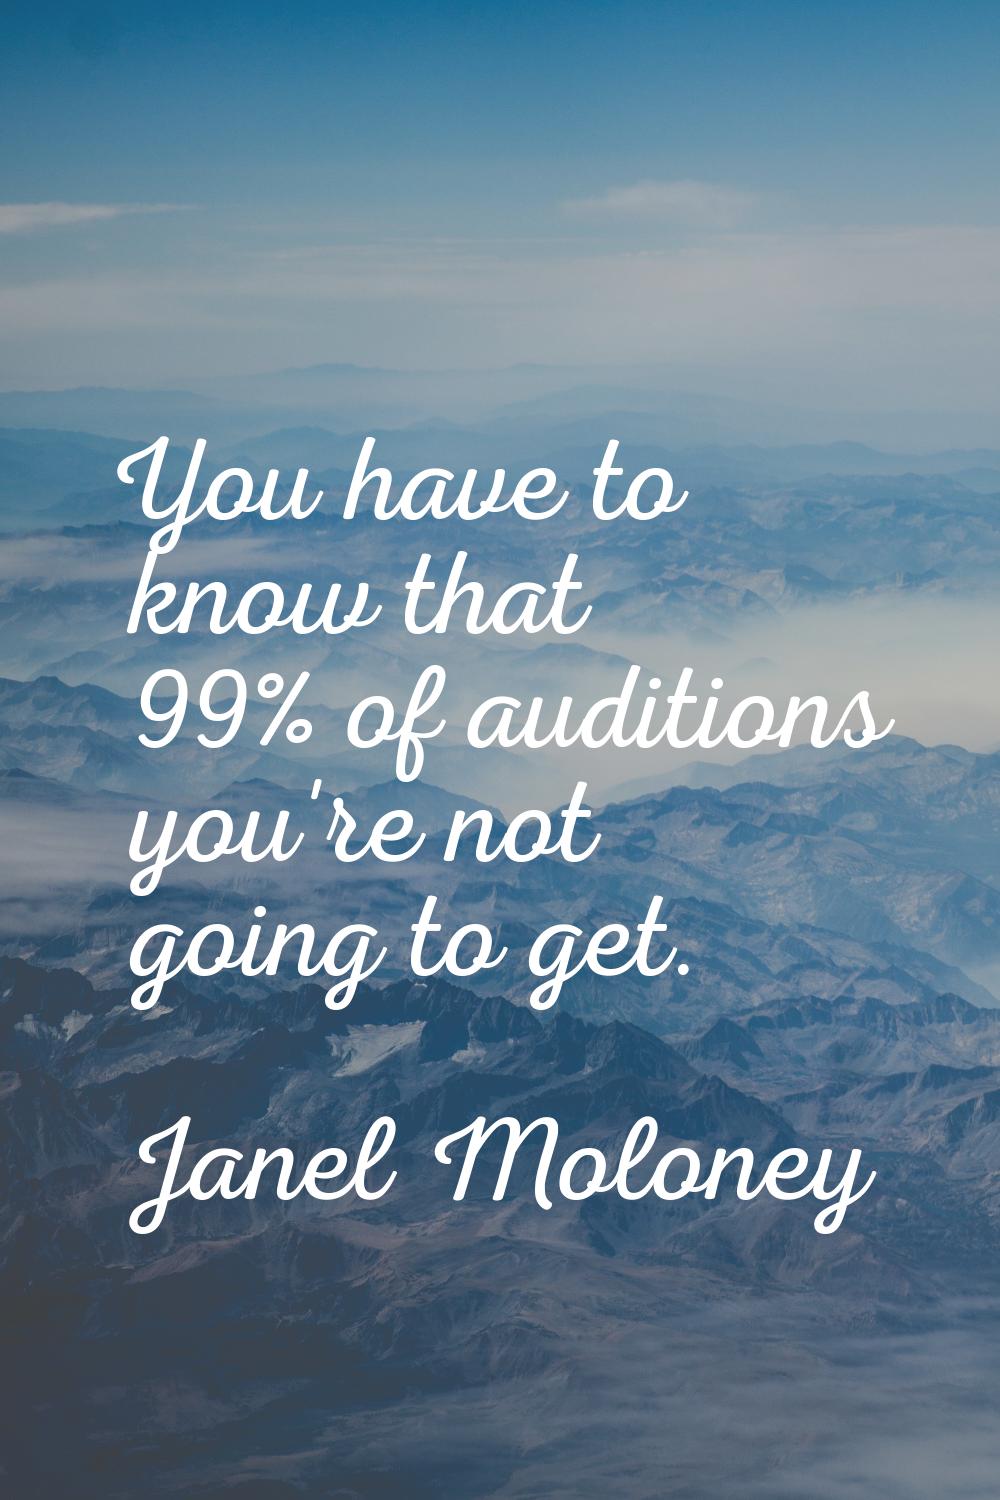 You have to know that 99% of auditions you're not going to get.